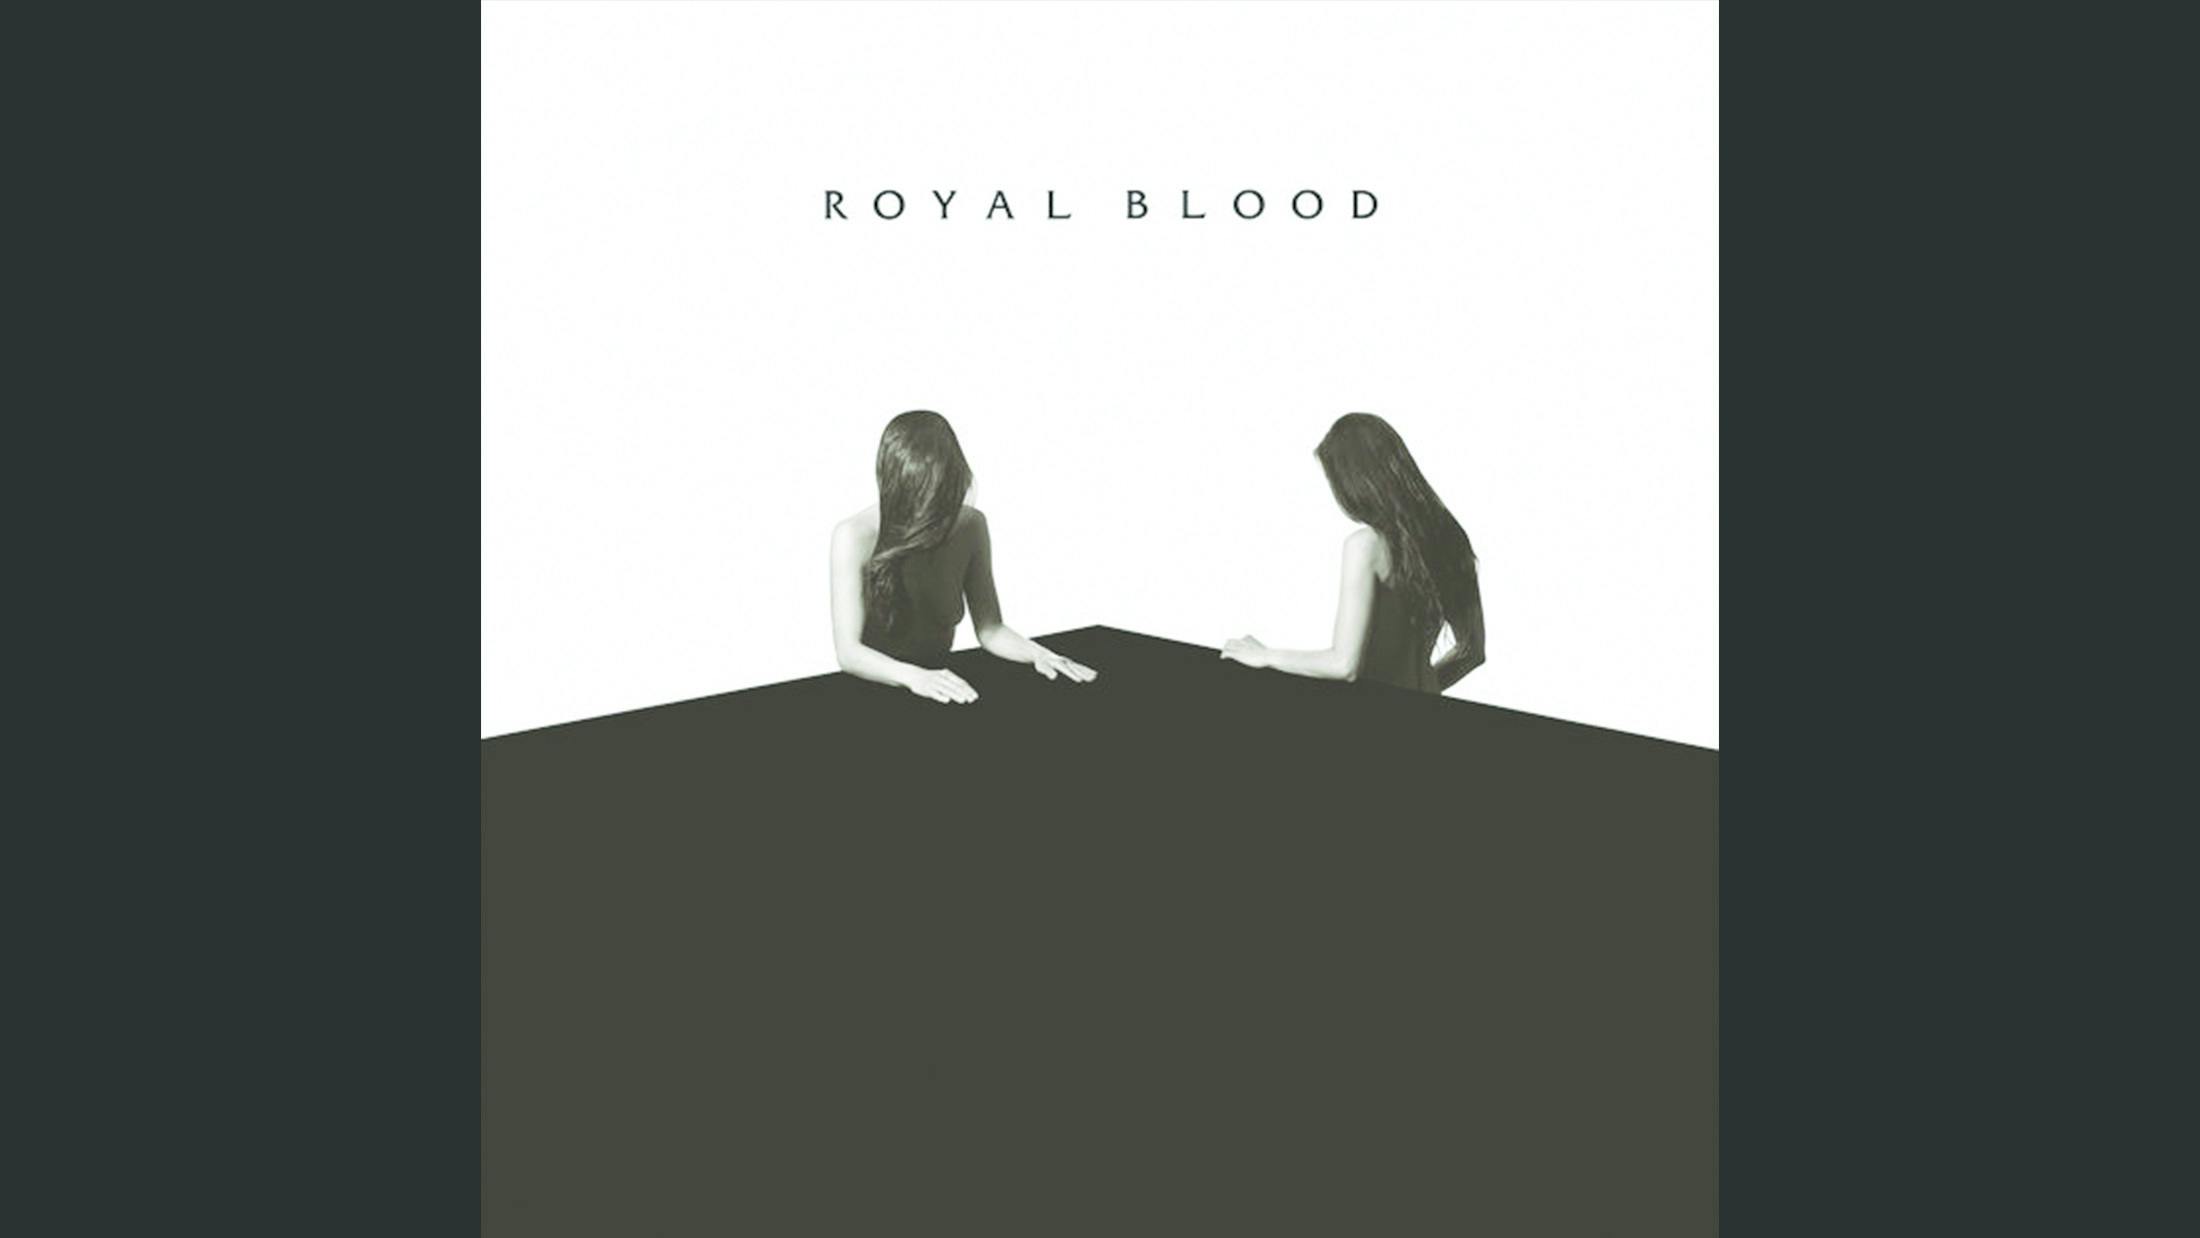 June 23 was the day Royal Blood won 2017. 
About to take to Glastonbury’s Pyramid Stage, the Brighton duo learnt that this second album had mashed its way to the top of the UK charts. And as expected, their swagger-tastic set rubber-stamped them as the country’s biggest new(ish) rock band. This status was only possible thanks to the way How Did We Get So Dark? took its self-titled predecessor’s slinky, low-slung grooves and bolstered them with the confidence and power its creators had since accumulated.